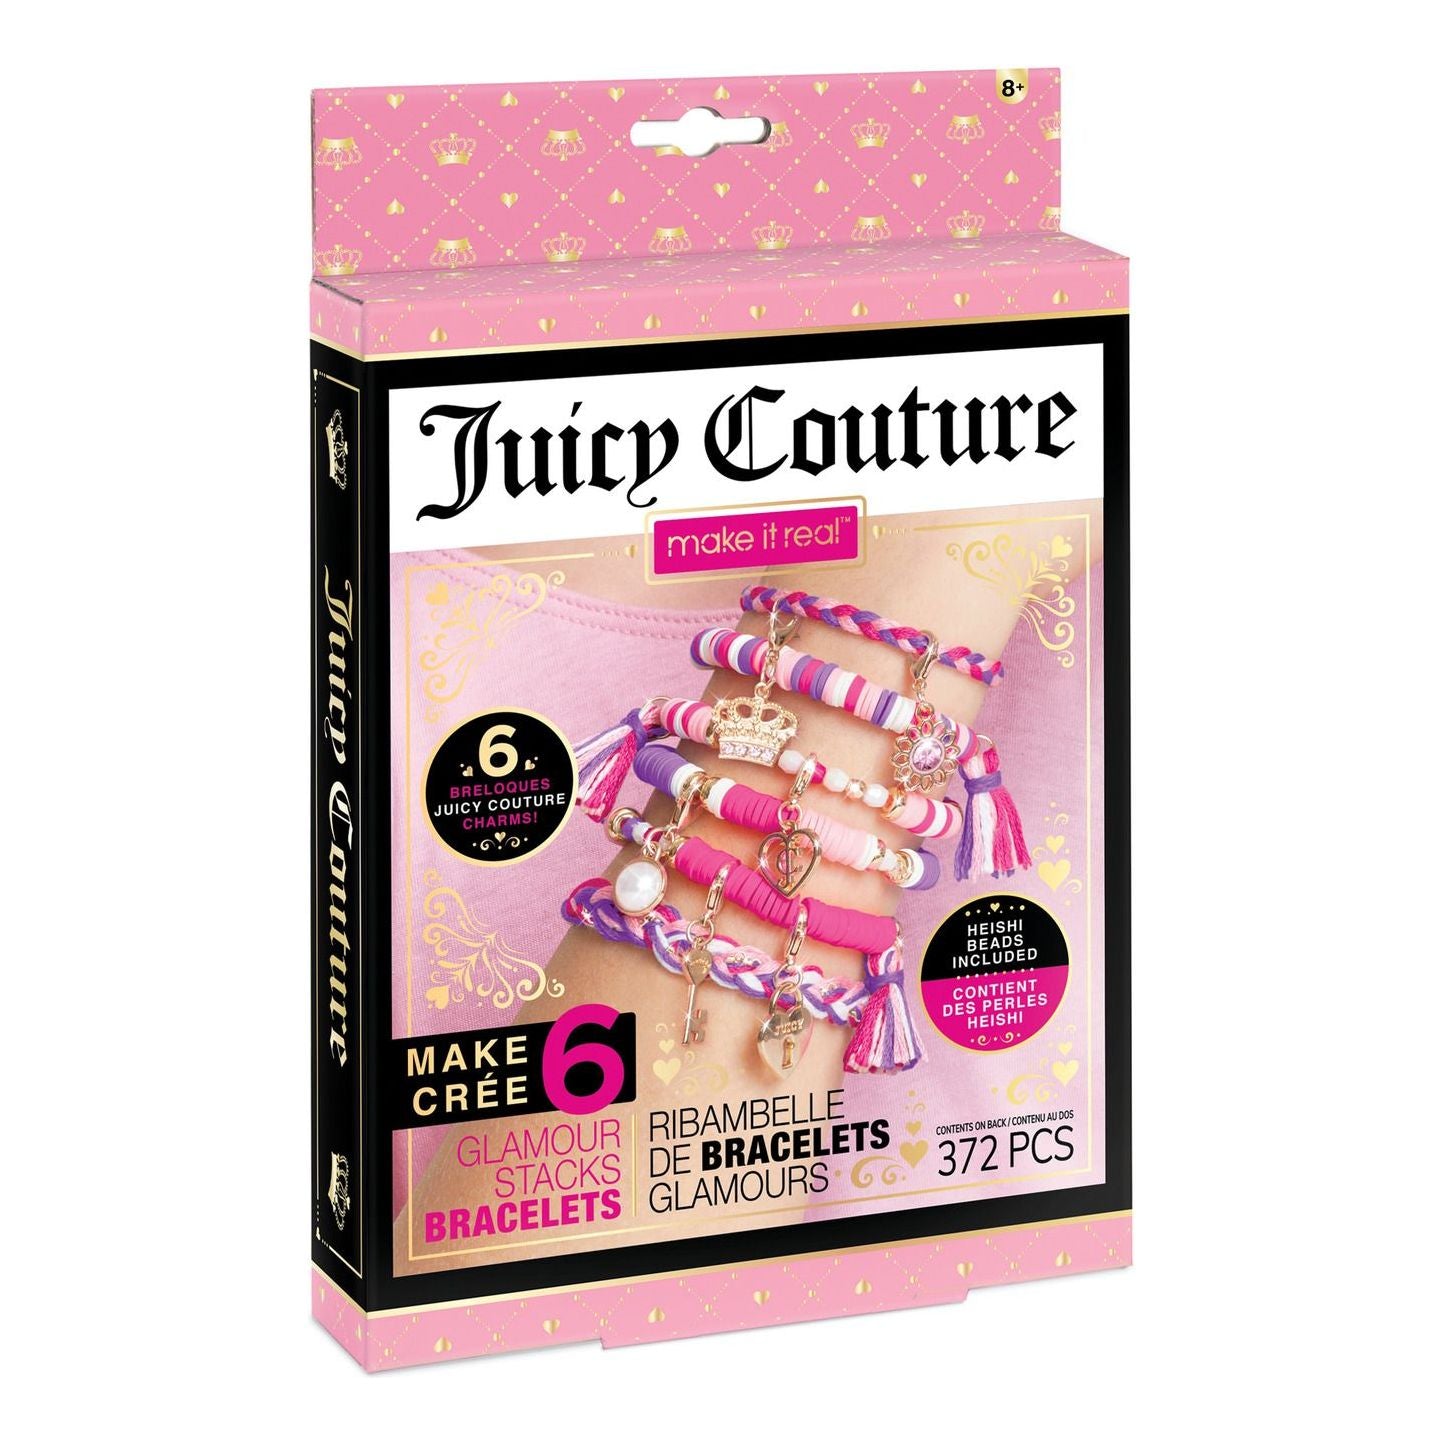 Juicy Couture Glamour Stacks Make It Real